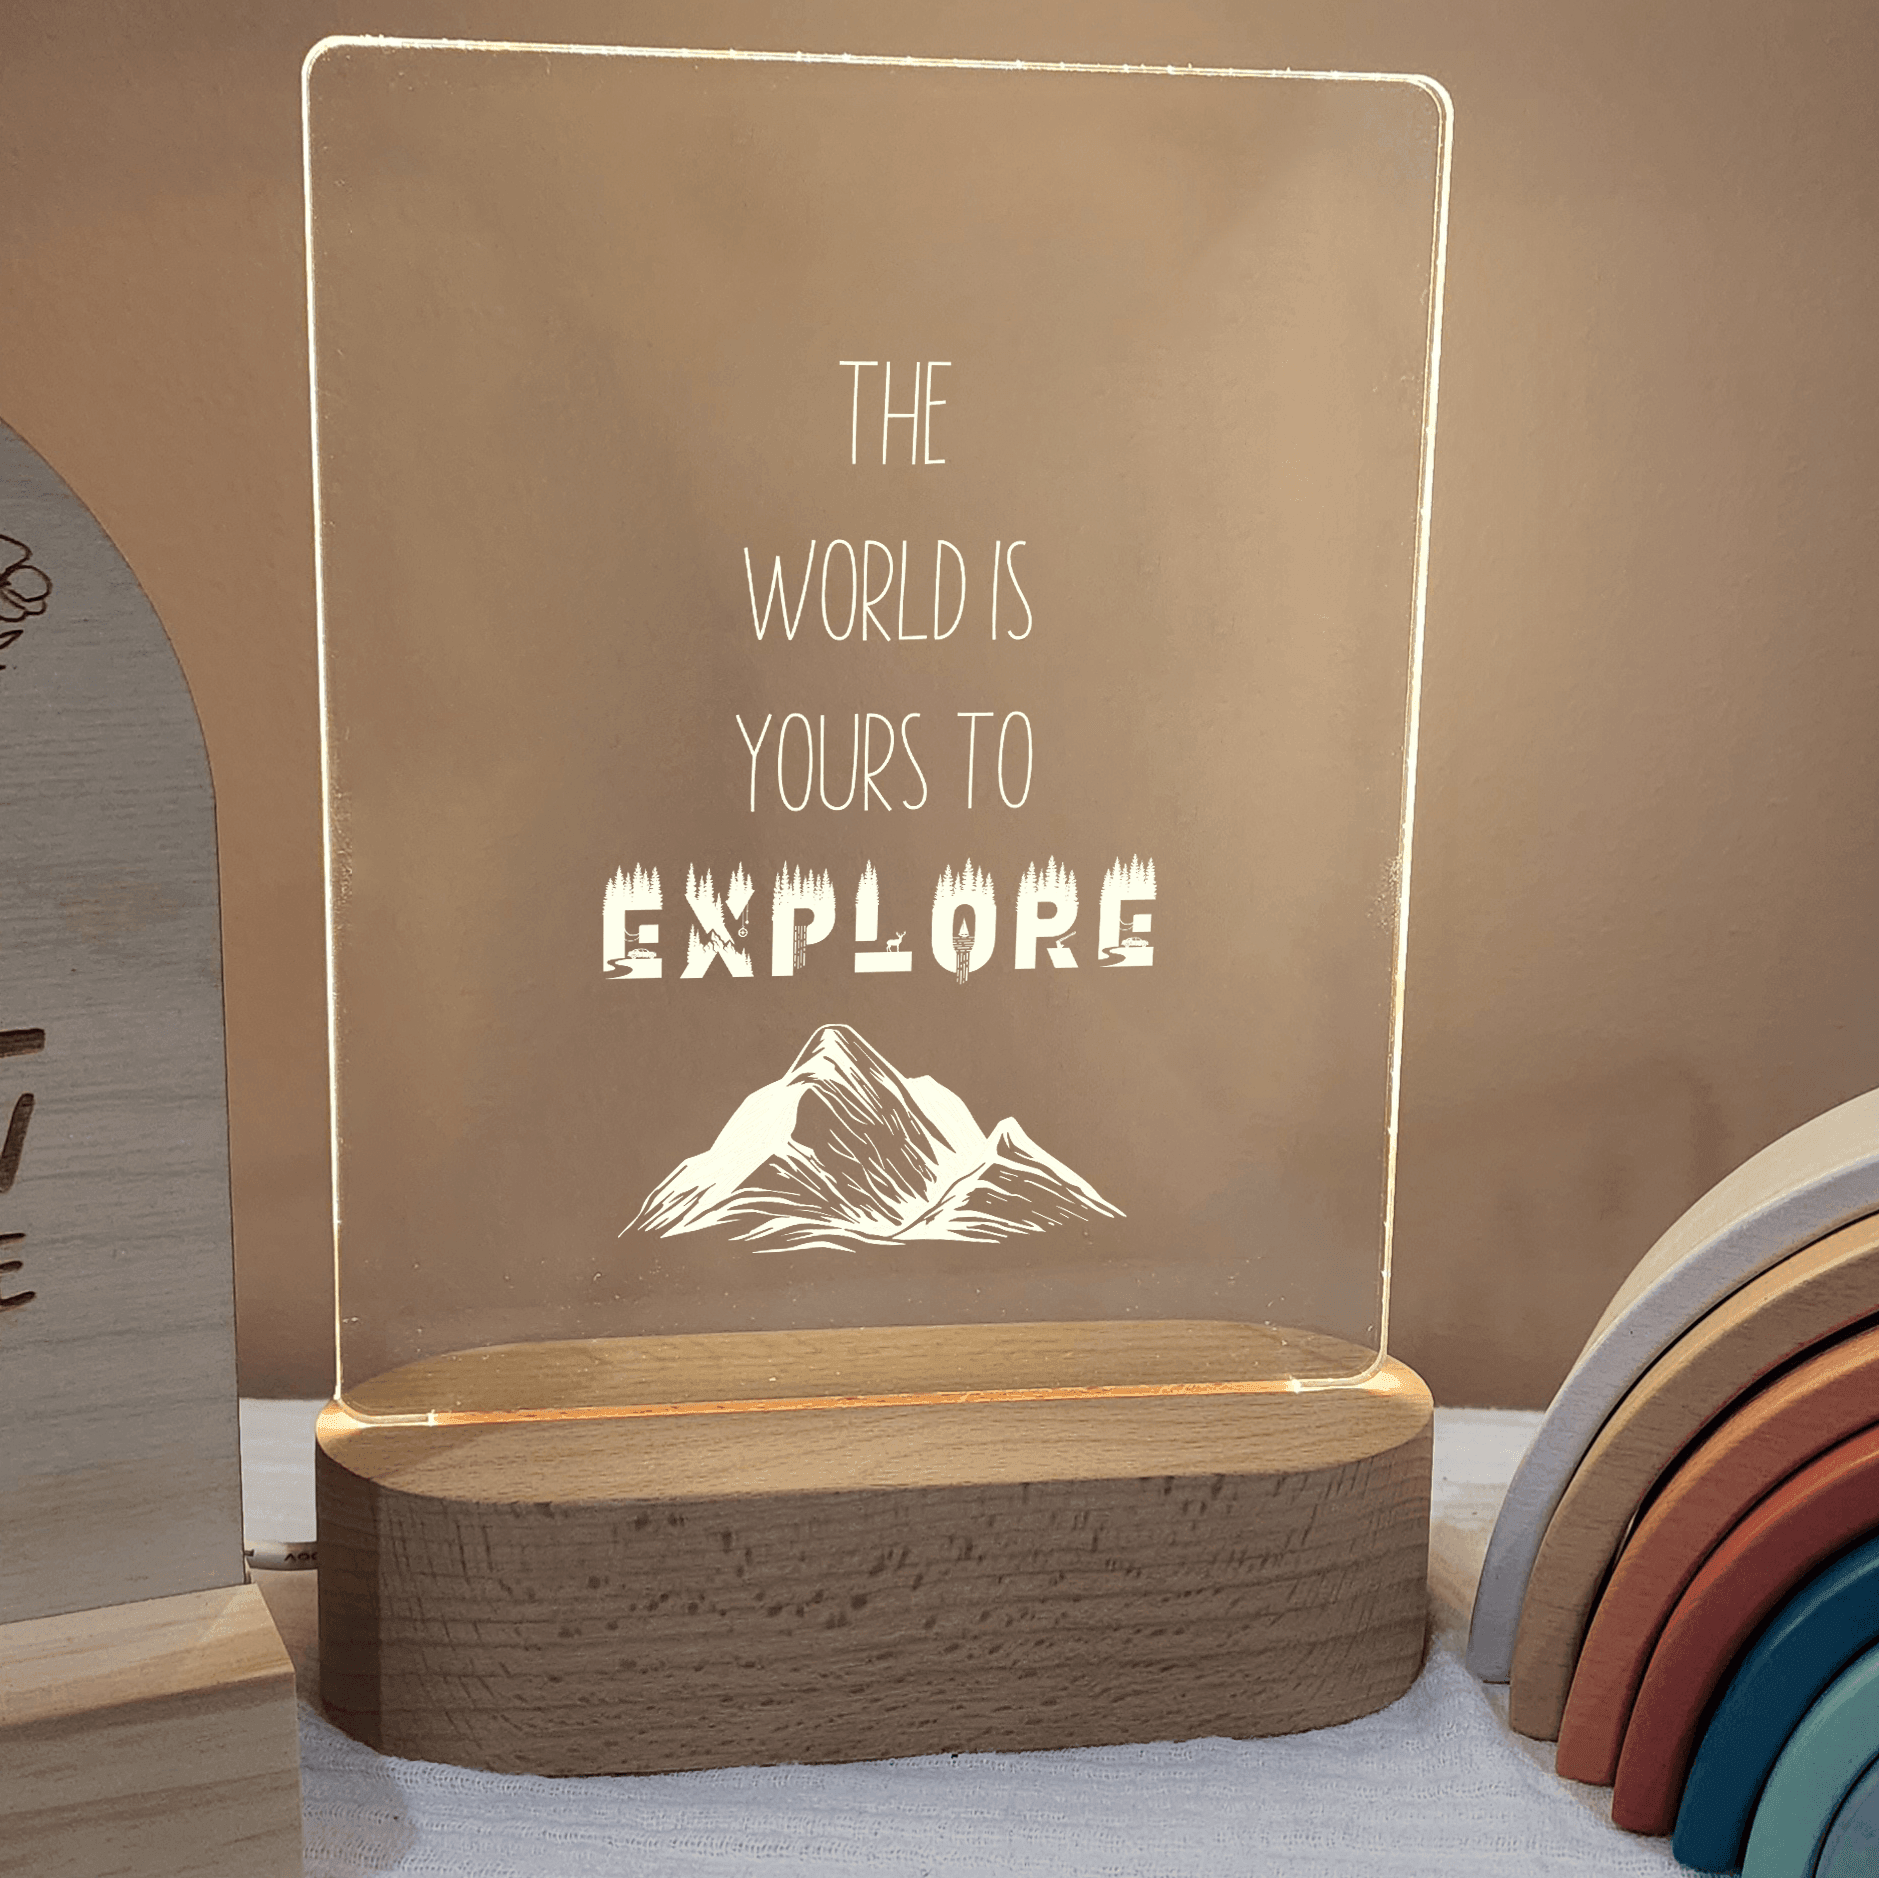 Quote Night Light 🌙 - The World is Yours to Explore (Mountains) - The Willow Corner